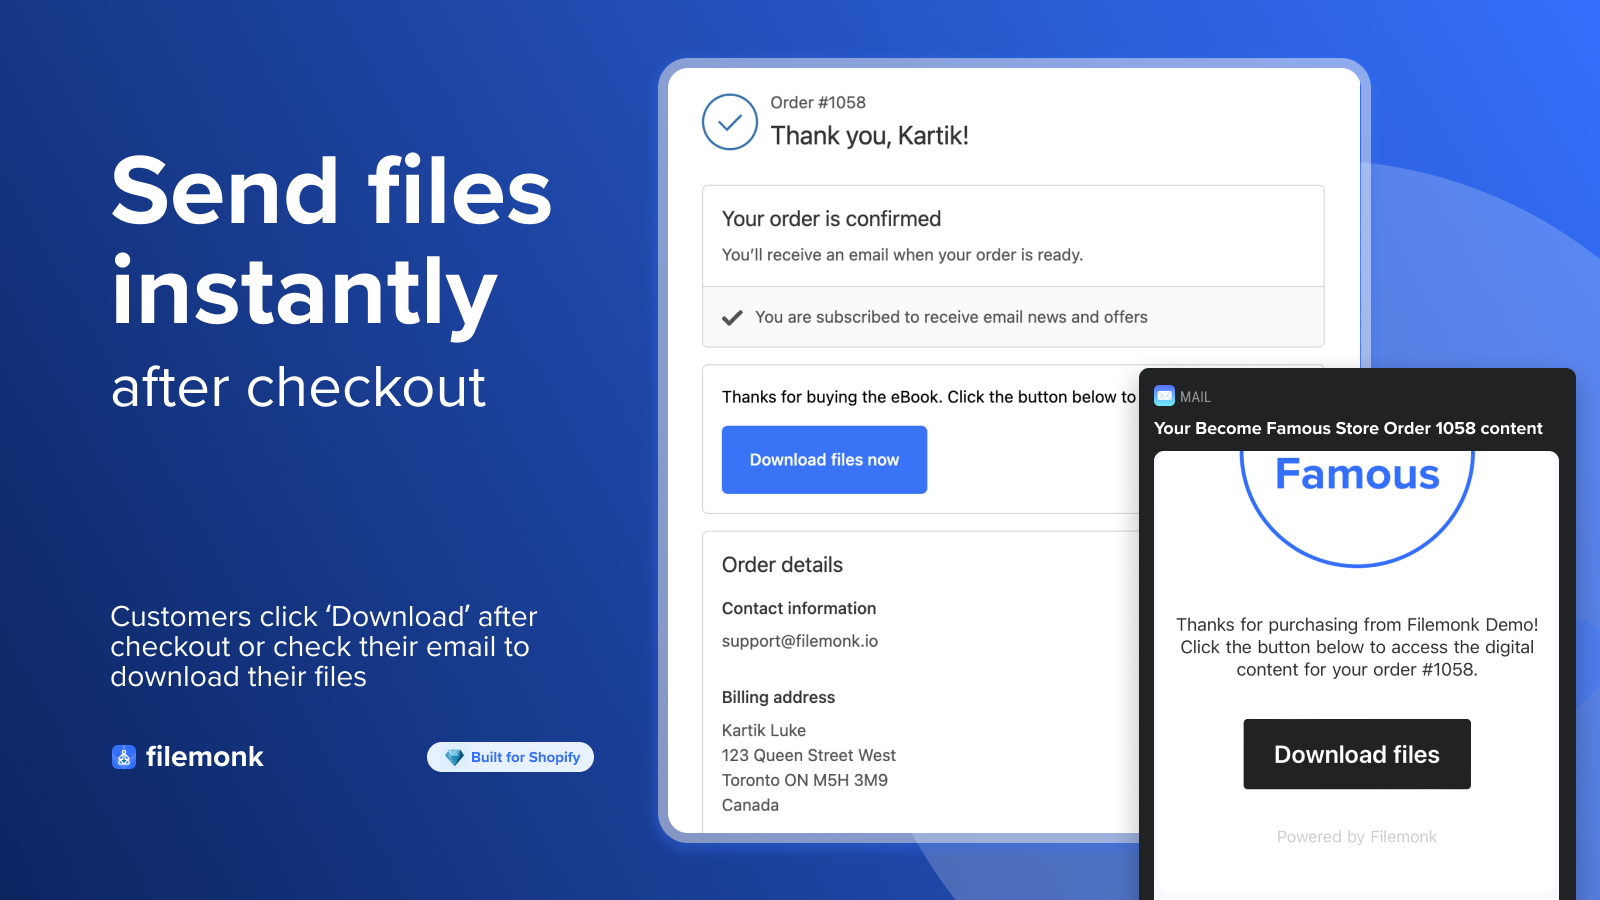 Send files to your customers instantly after checkout